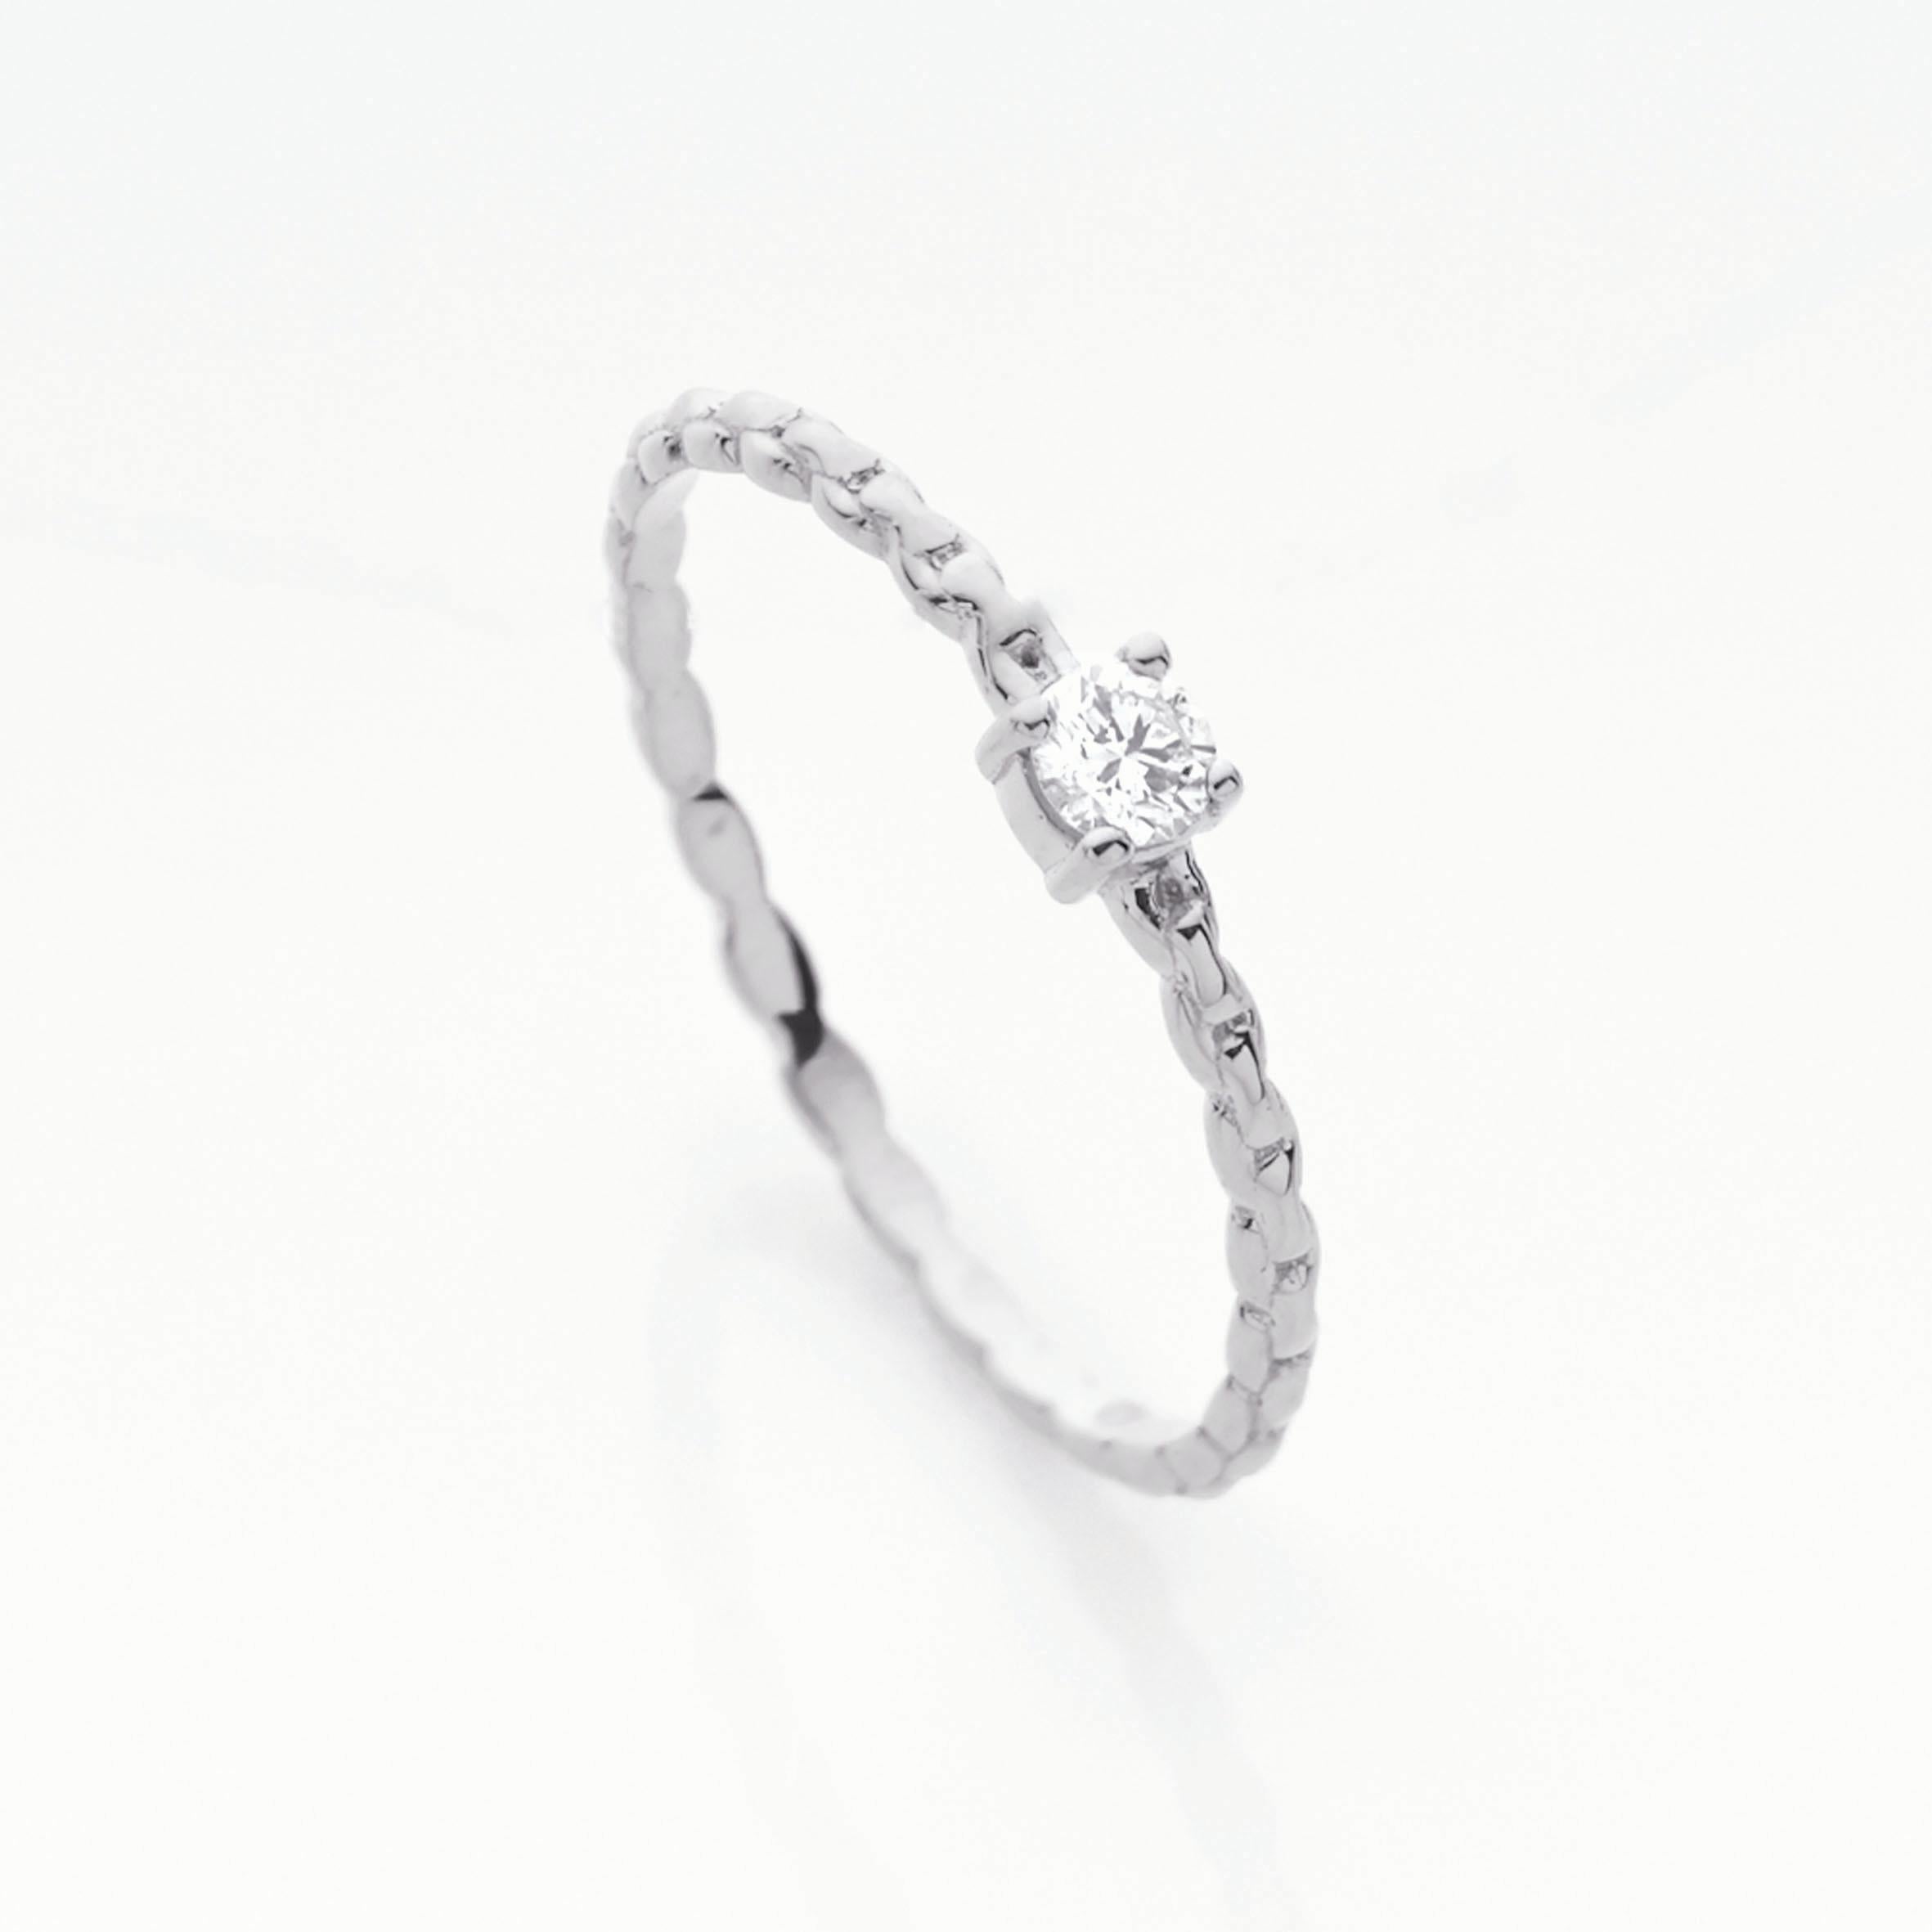 PETITE DIAMOND COLLECTION 

Inspired by the Twinkling Stars of The Night, the Petite Diamond Collection is a series of almost invisible skin-jewellery;  hand-crafted with the most delicate diamond-setting and workmanship possible.   Much like the